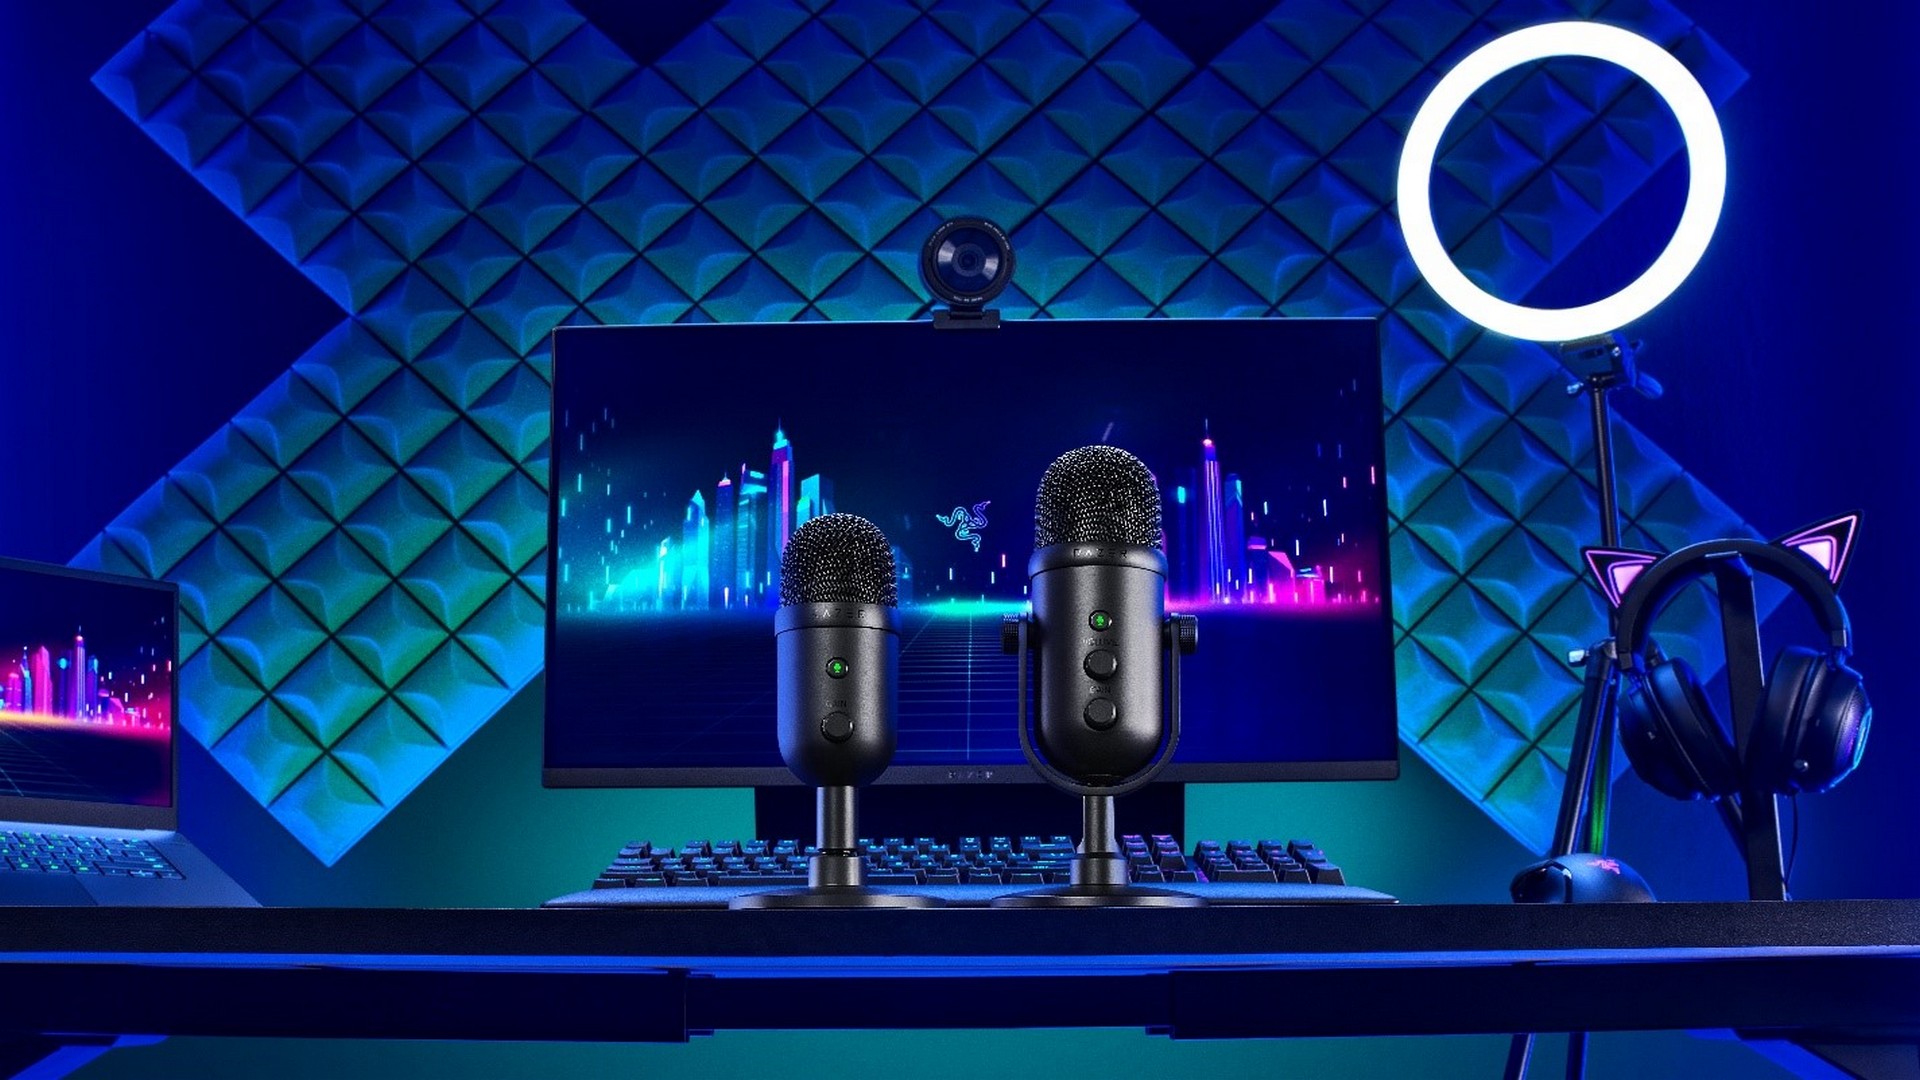 Razer Launches New Microphones For Any Professional Or Budding Streamer – The Seiren V2 PRO & Seiren V2 X